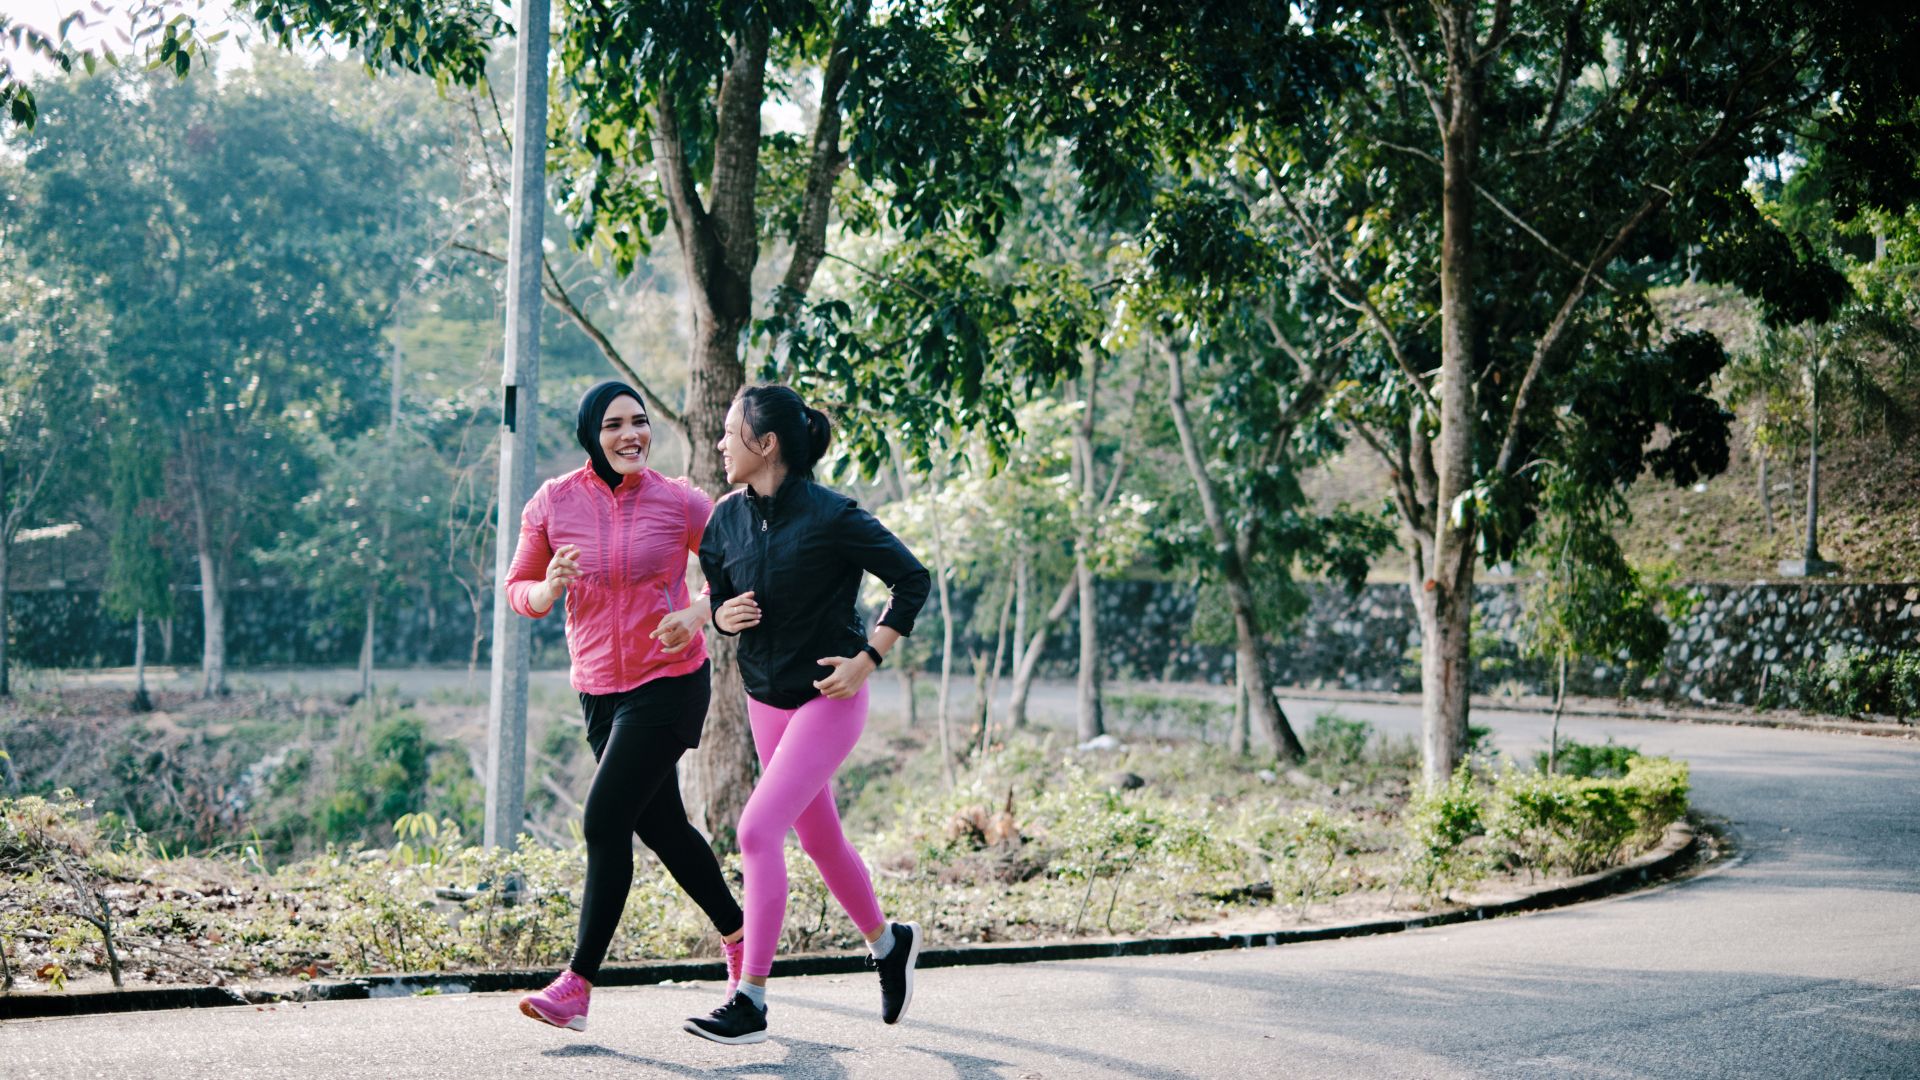 Two women running together in the park along a path laughing and smiling